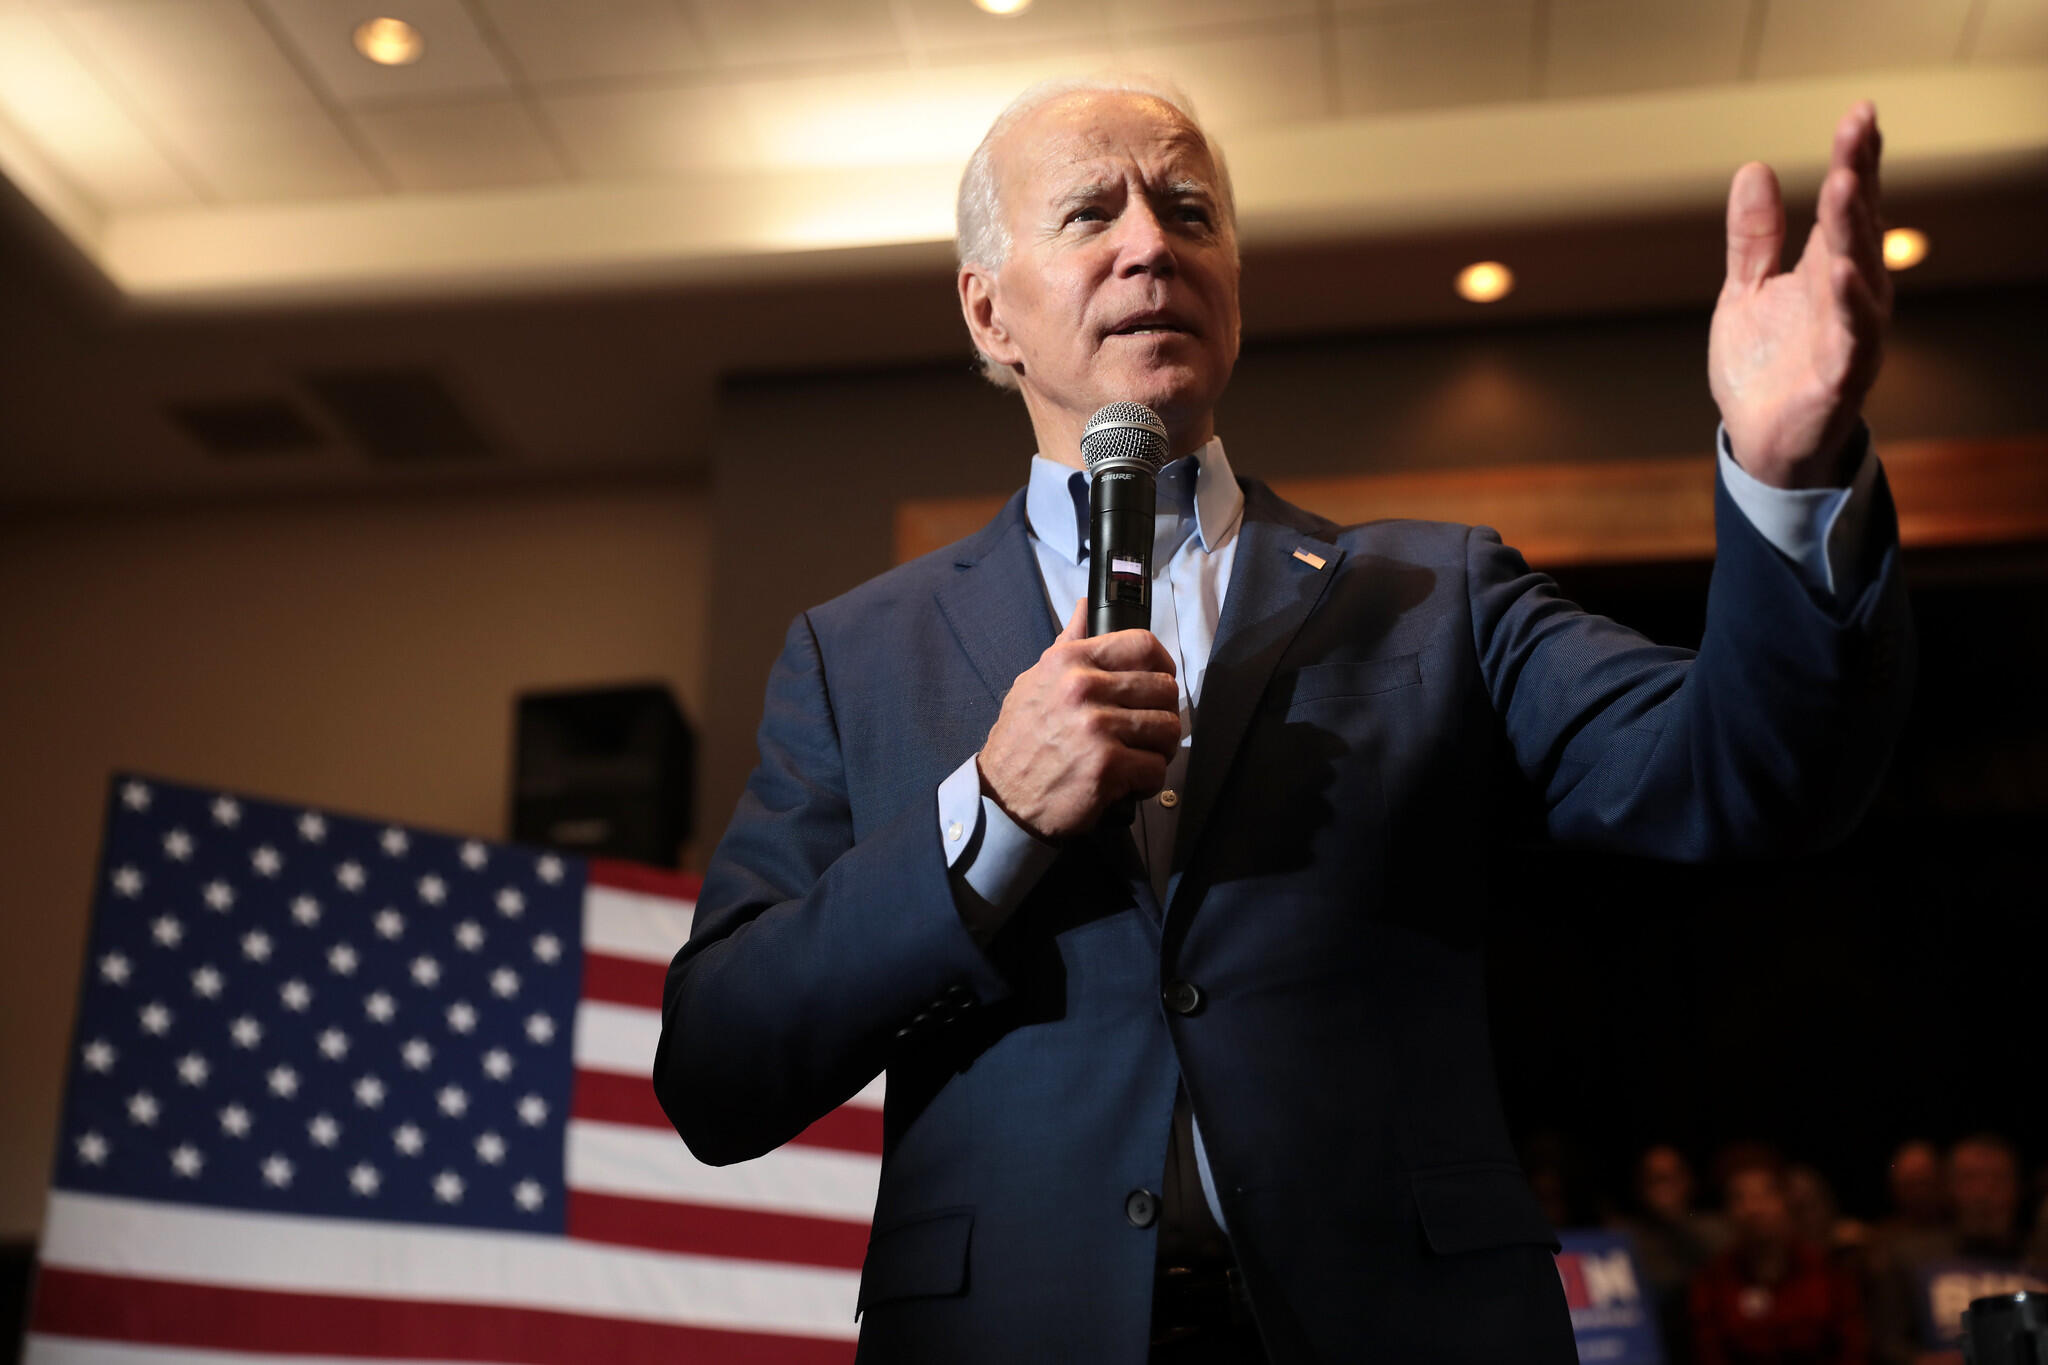 President Joe Biden speaks into a microphone in his hand and gestures with his other hand while standing in front of an American flag